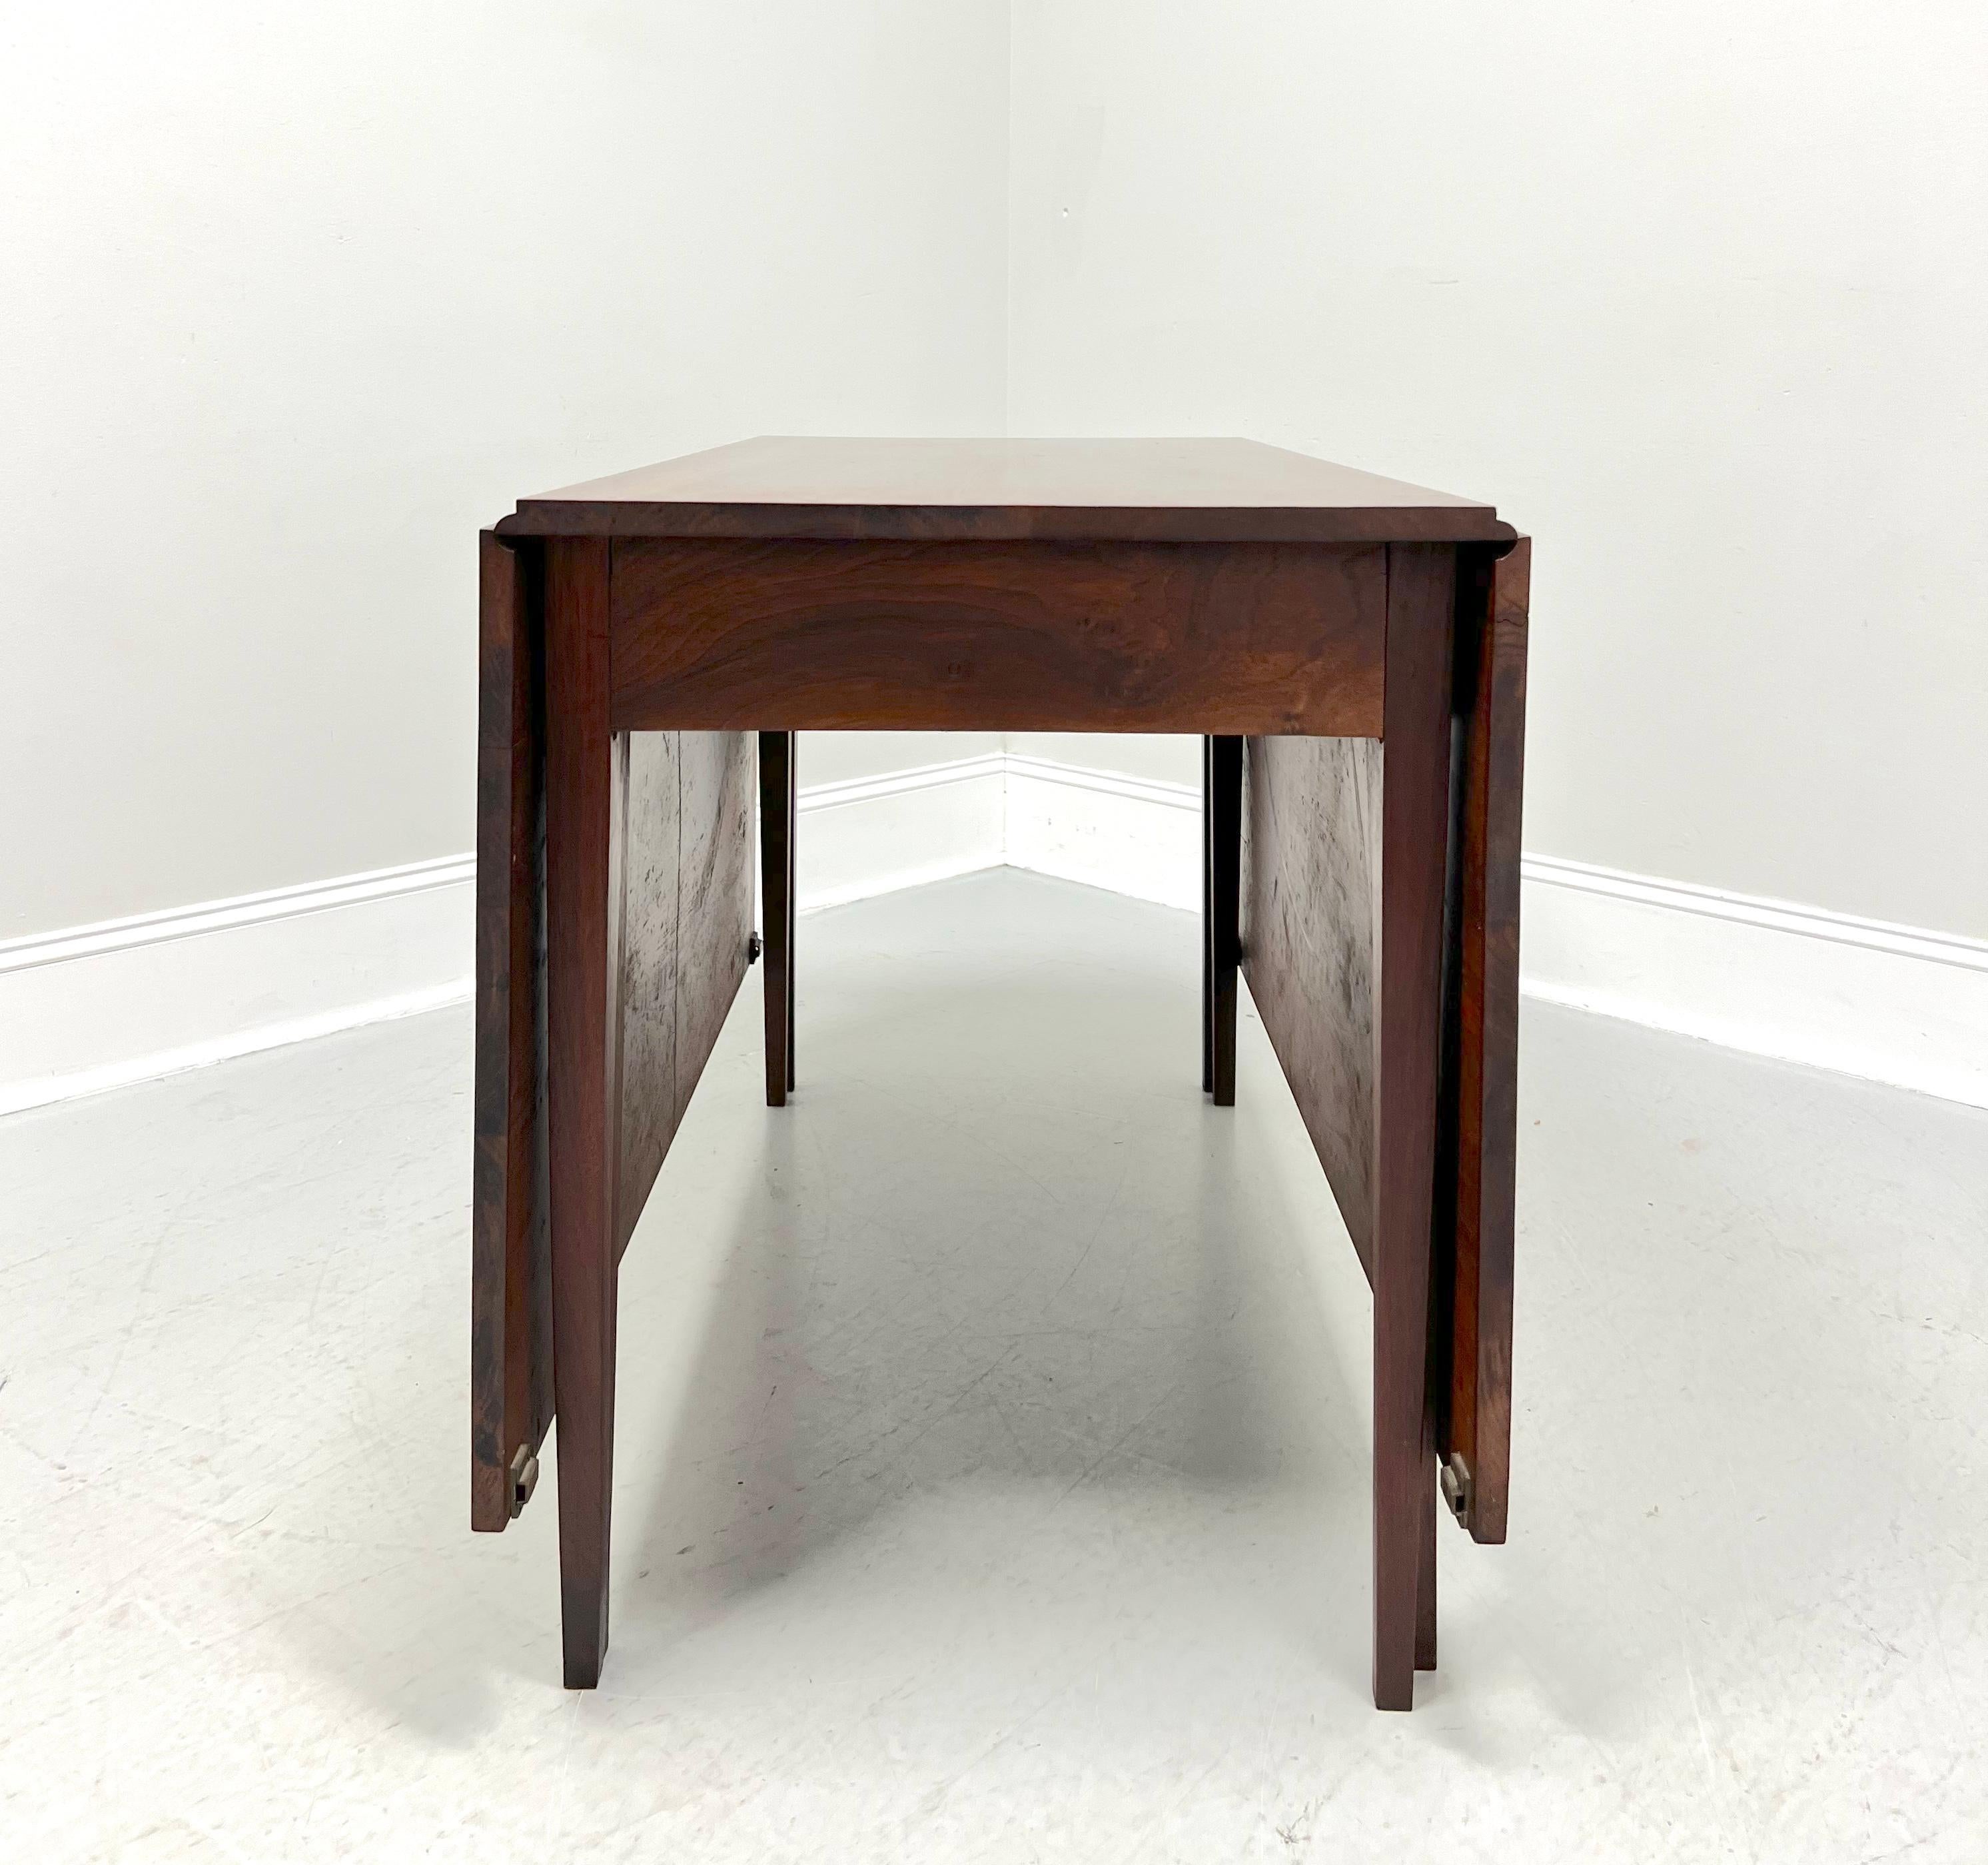 Antique Early 20th Century Walnut Hepplewhite Gateleg Drop-Leaf Dining Table For Sale 2